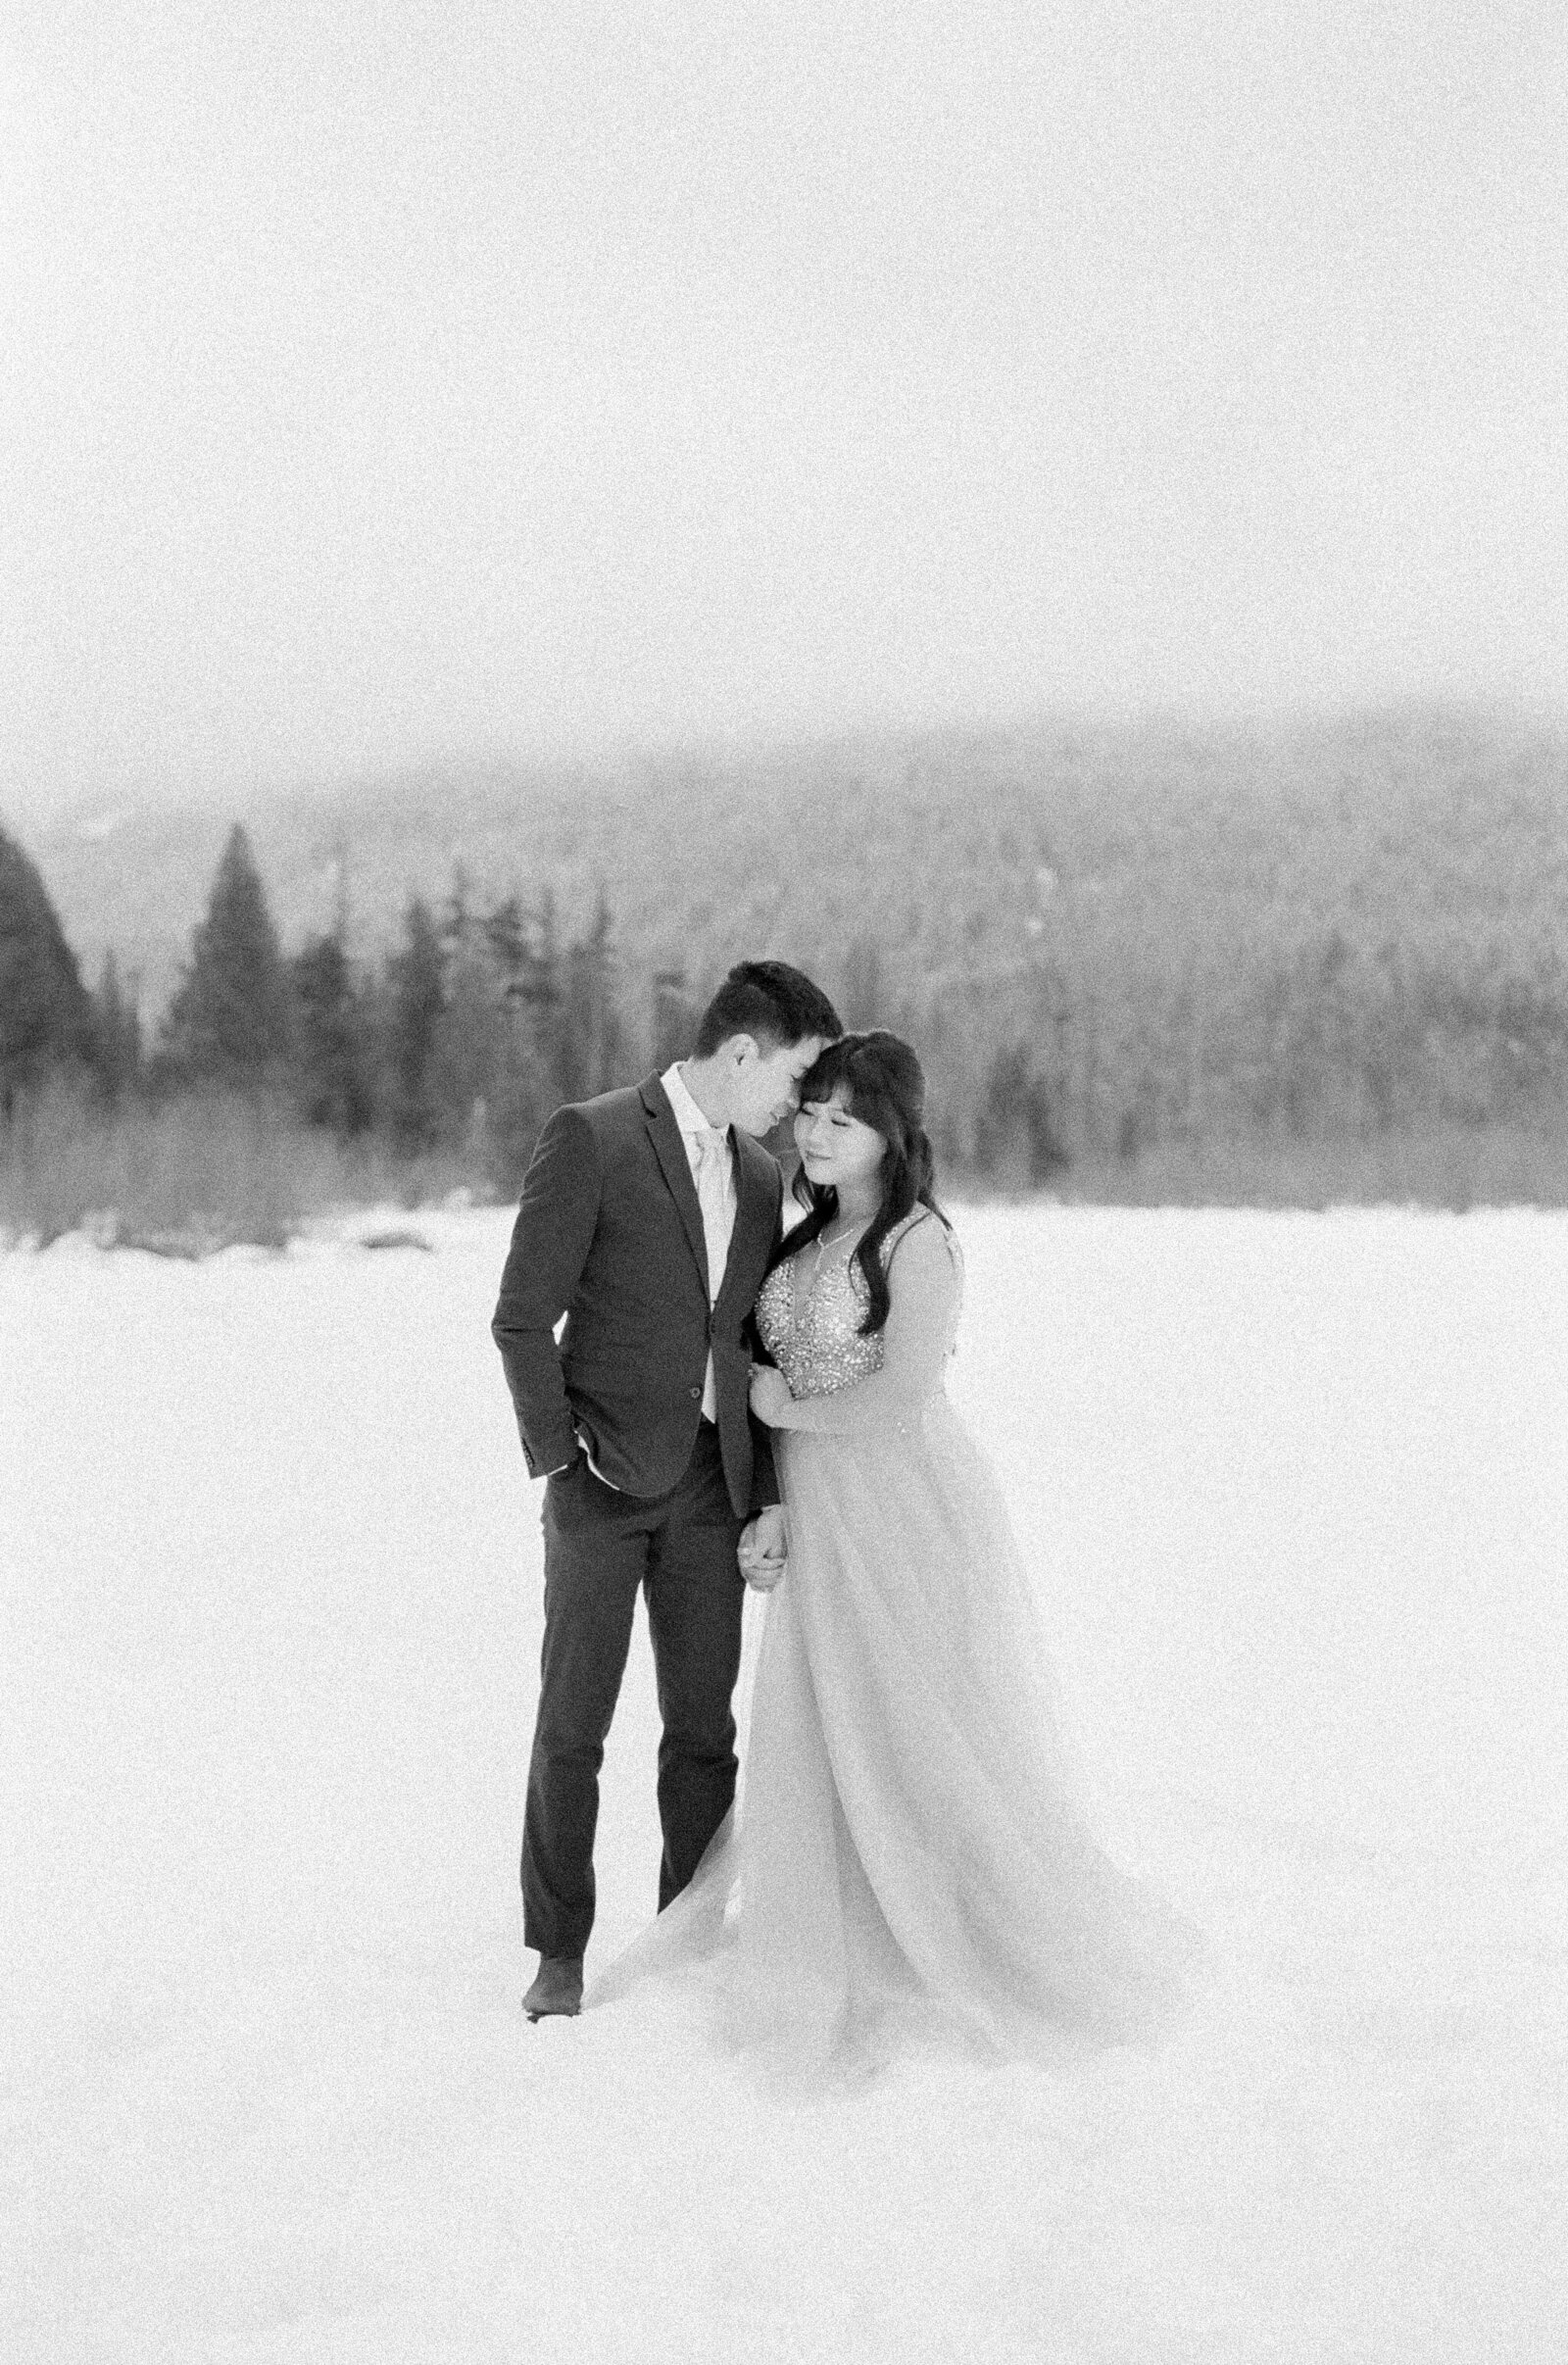 Annie and James Winter Session at Snoqualmie Pass - Kerry Jeanne Photography (74 of 178)